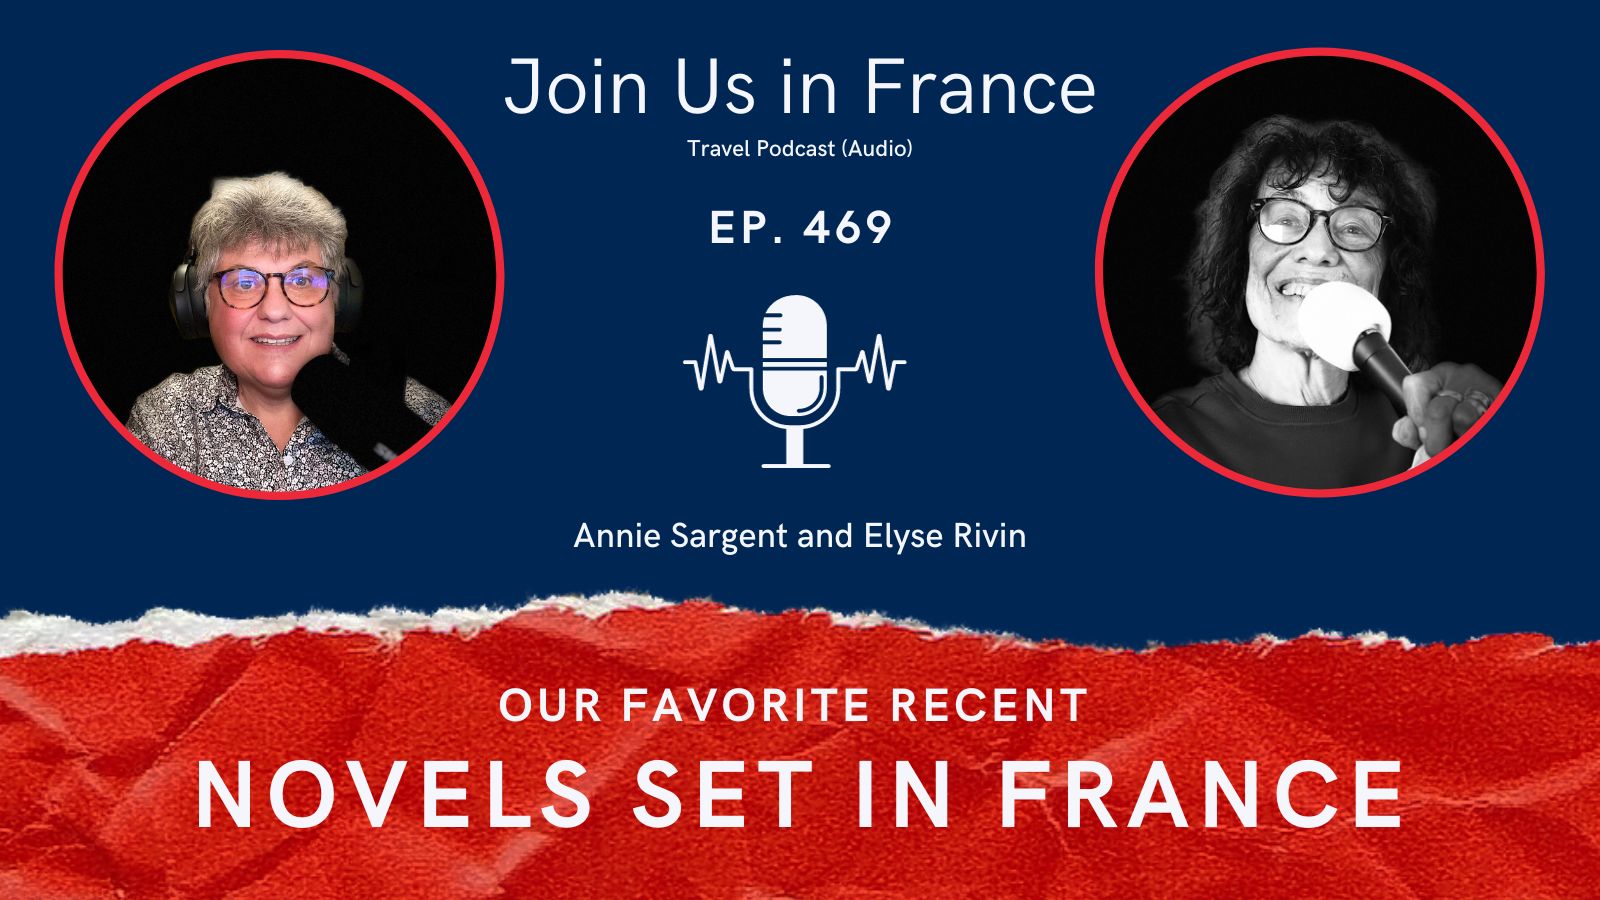 Contemporary French Novels episode with Annie Sargent and Elyse Rivin